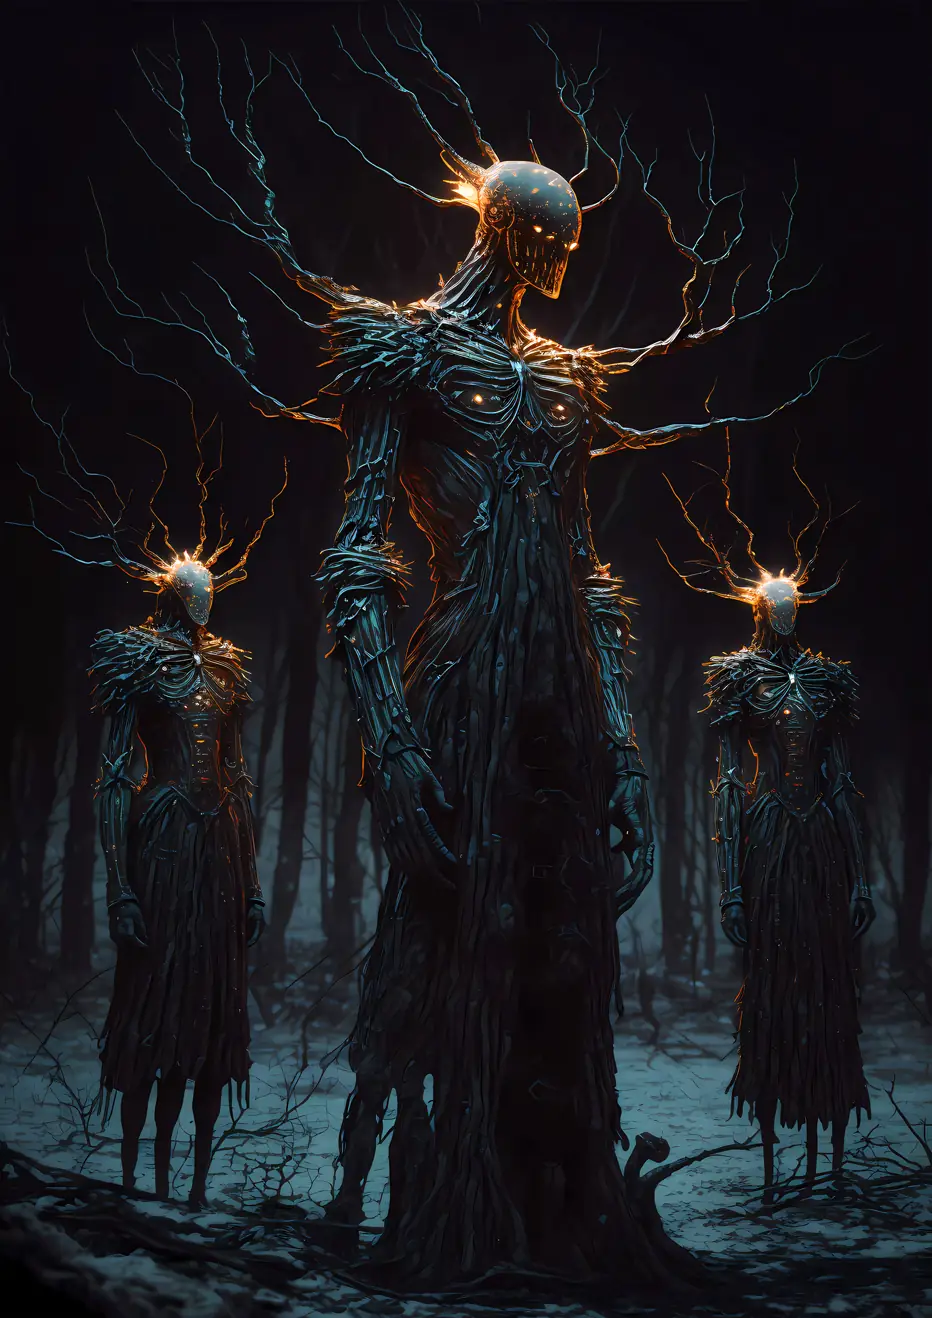 Demon's Radiance: Haunting portrayal of tree-like entities in a dark forest resonating with an orange glow.